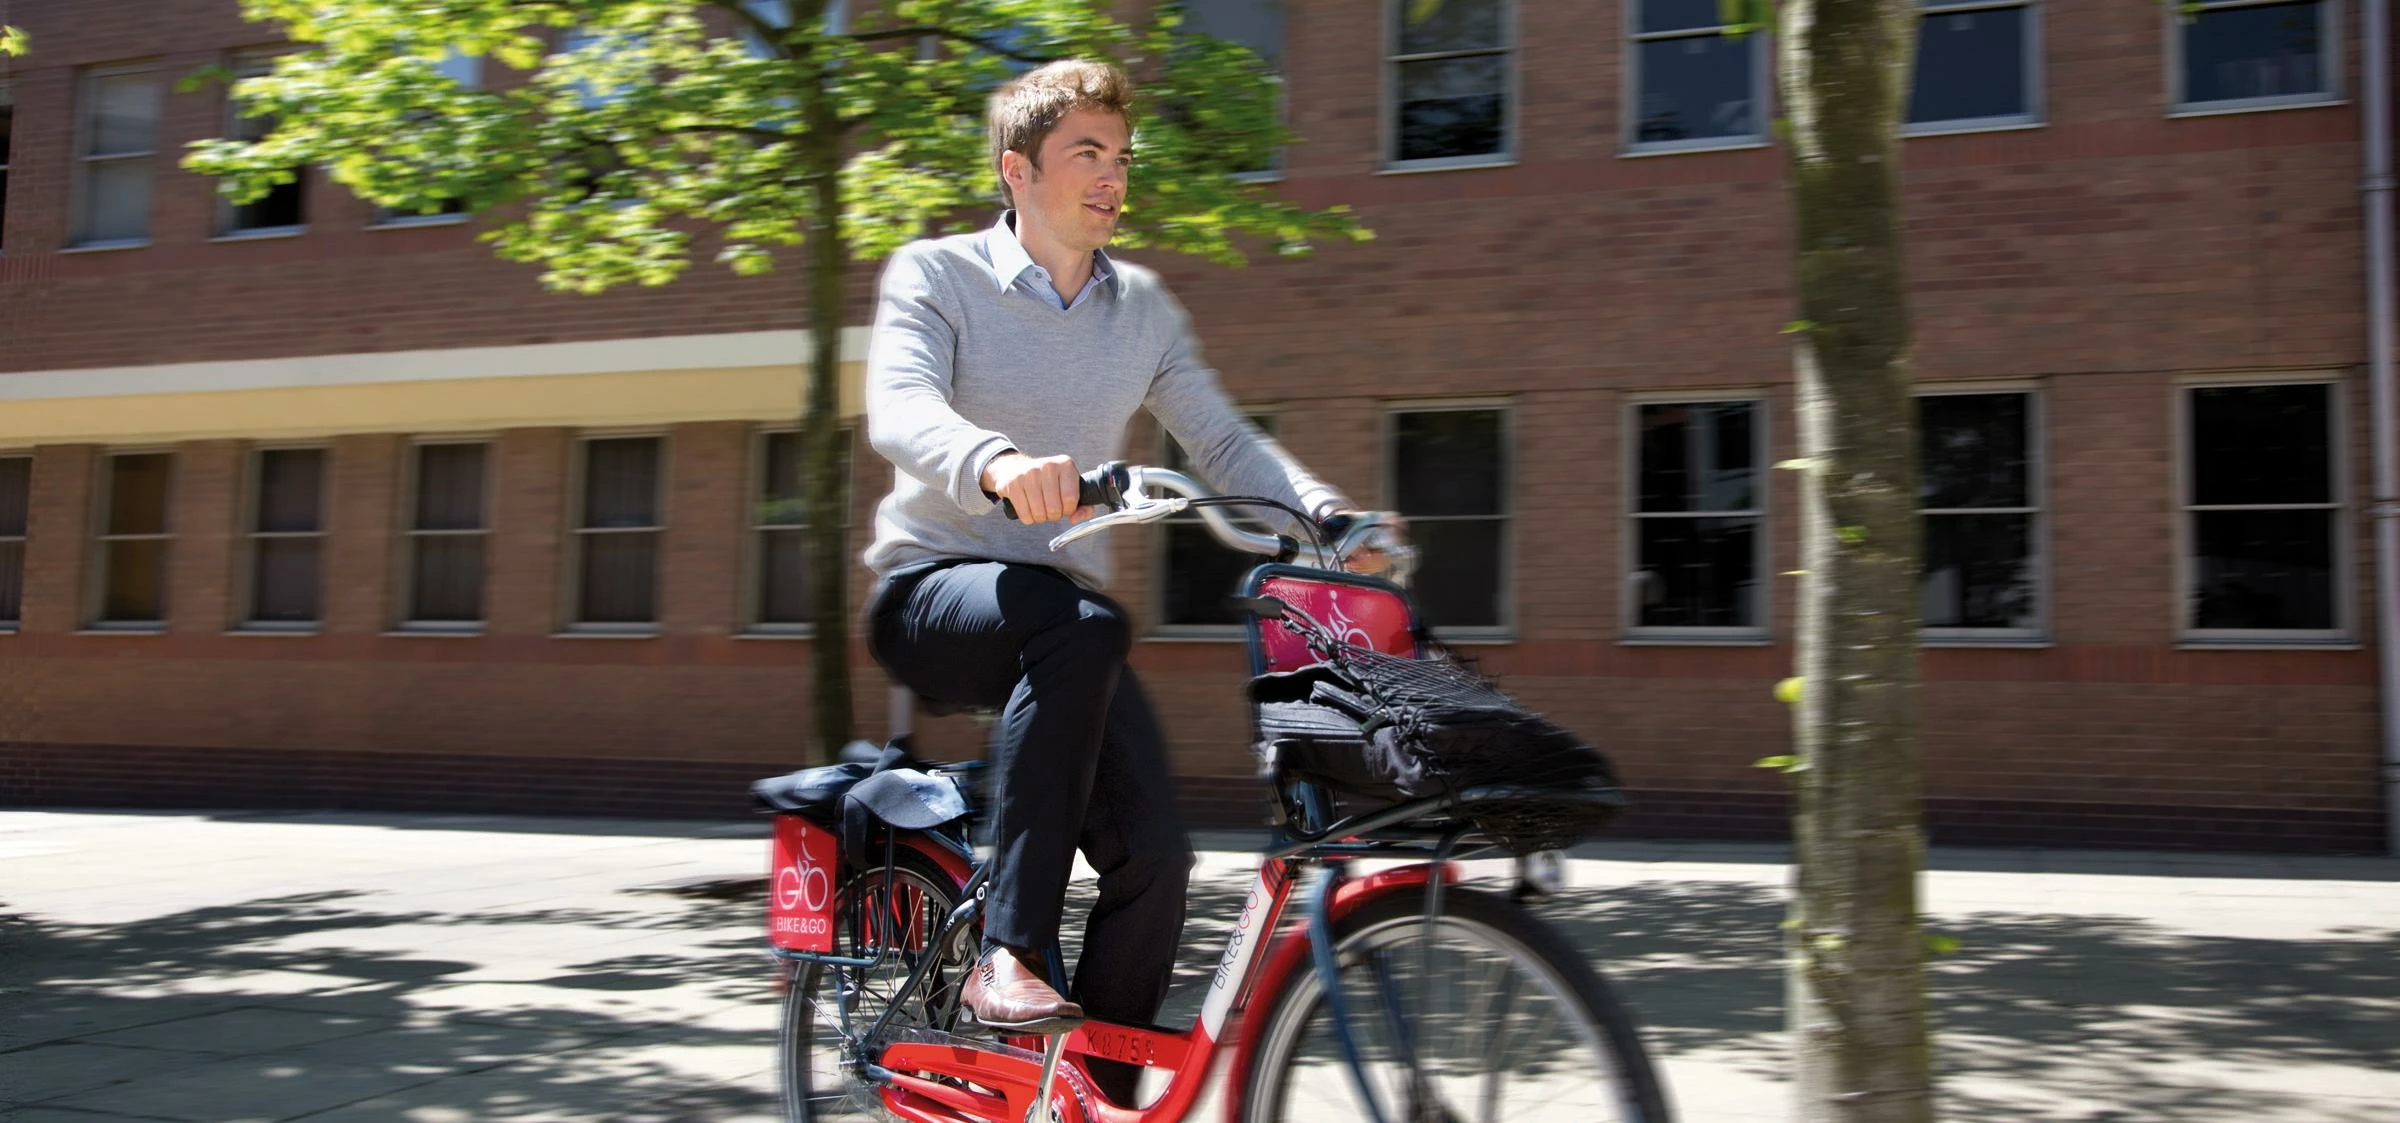 Hire a Bike & Go bike for free on Cycle to Work Day